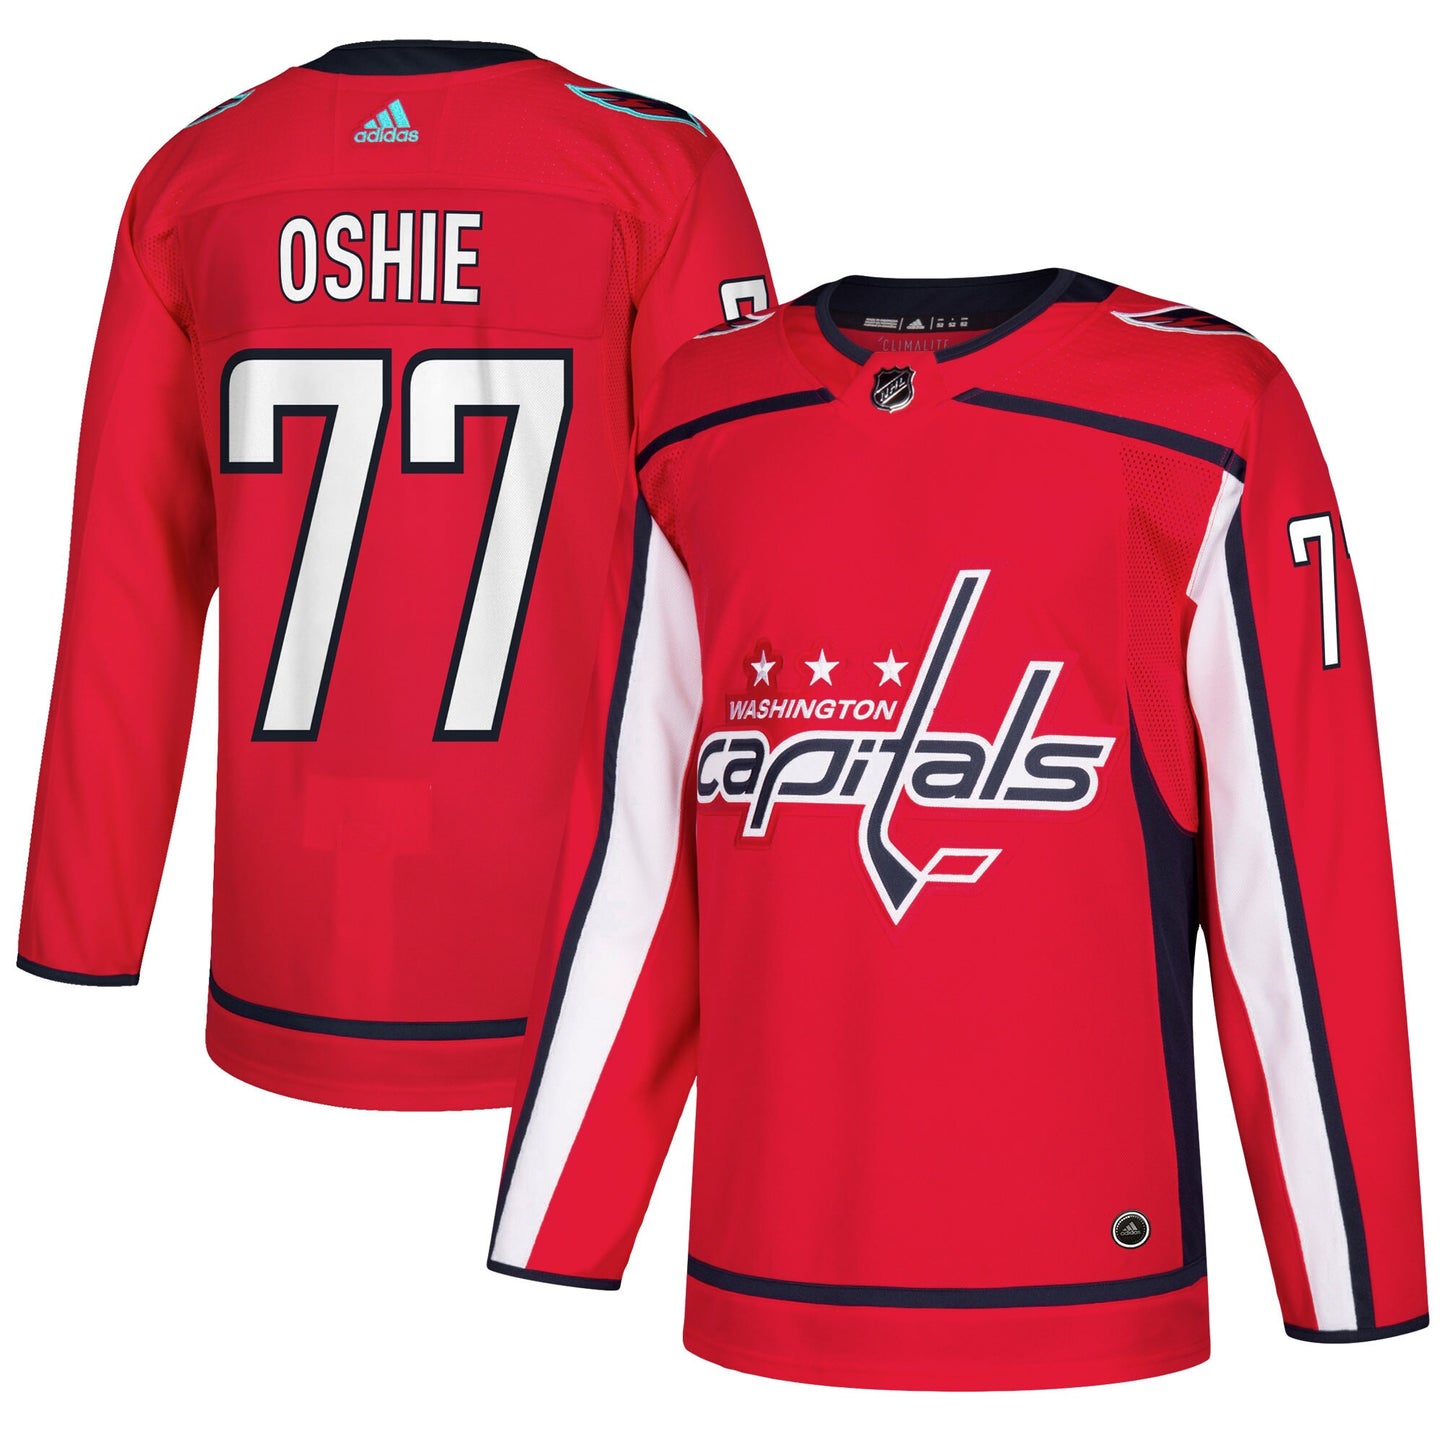 TJ Oshie Washington Capitals adidas Authentic Player Jersey - Red